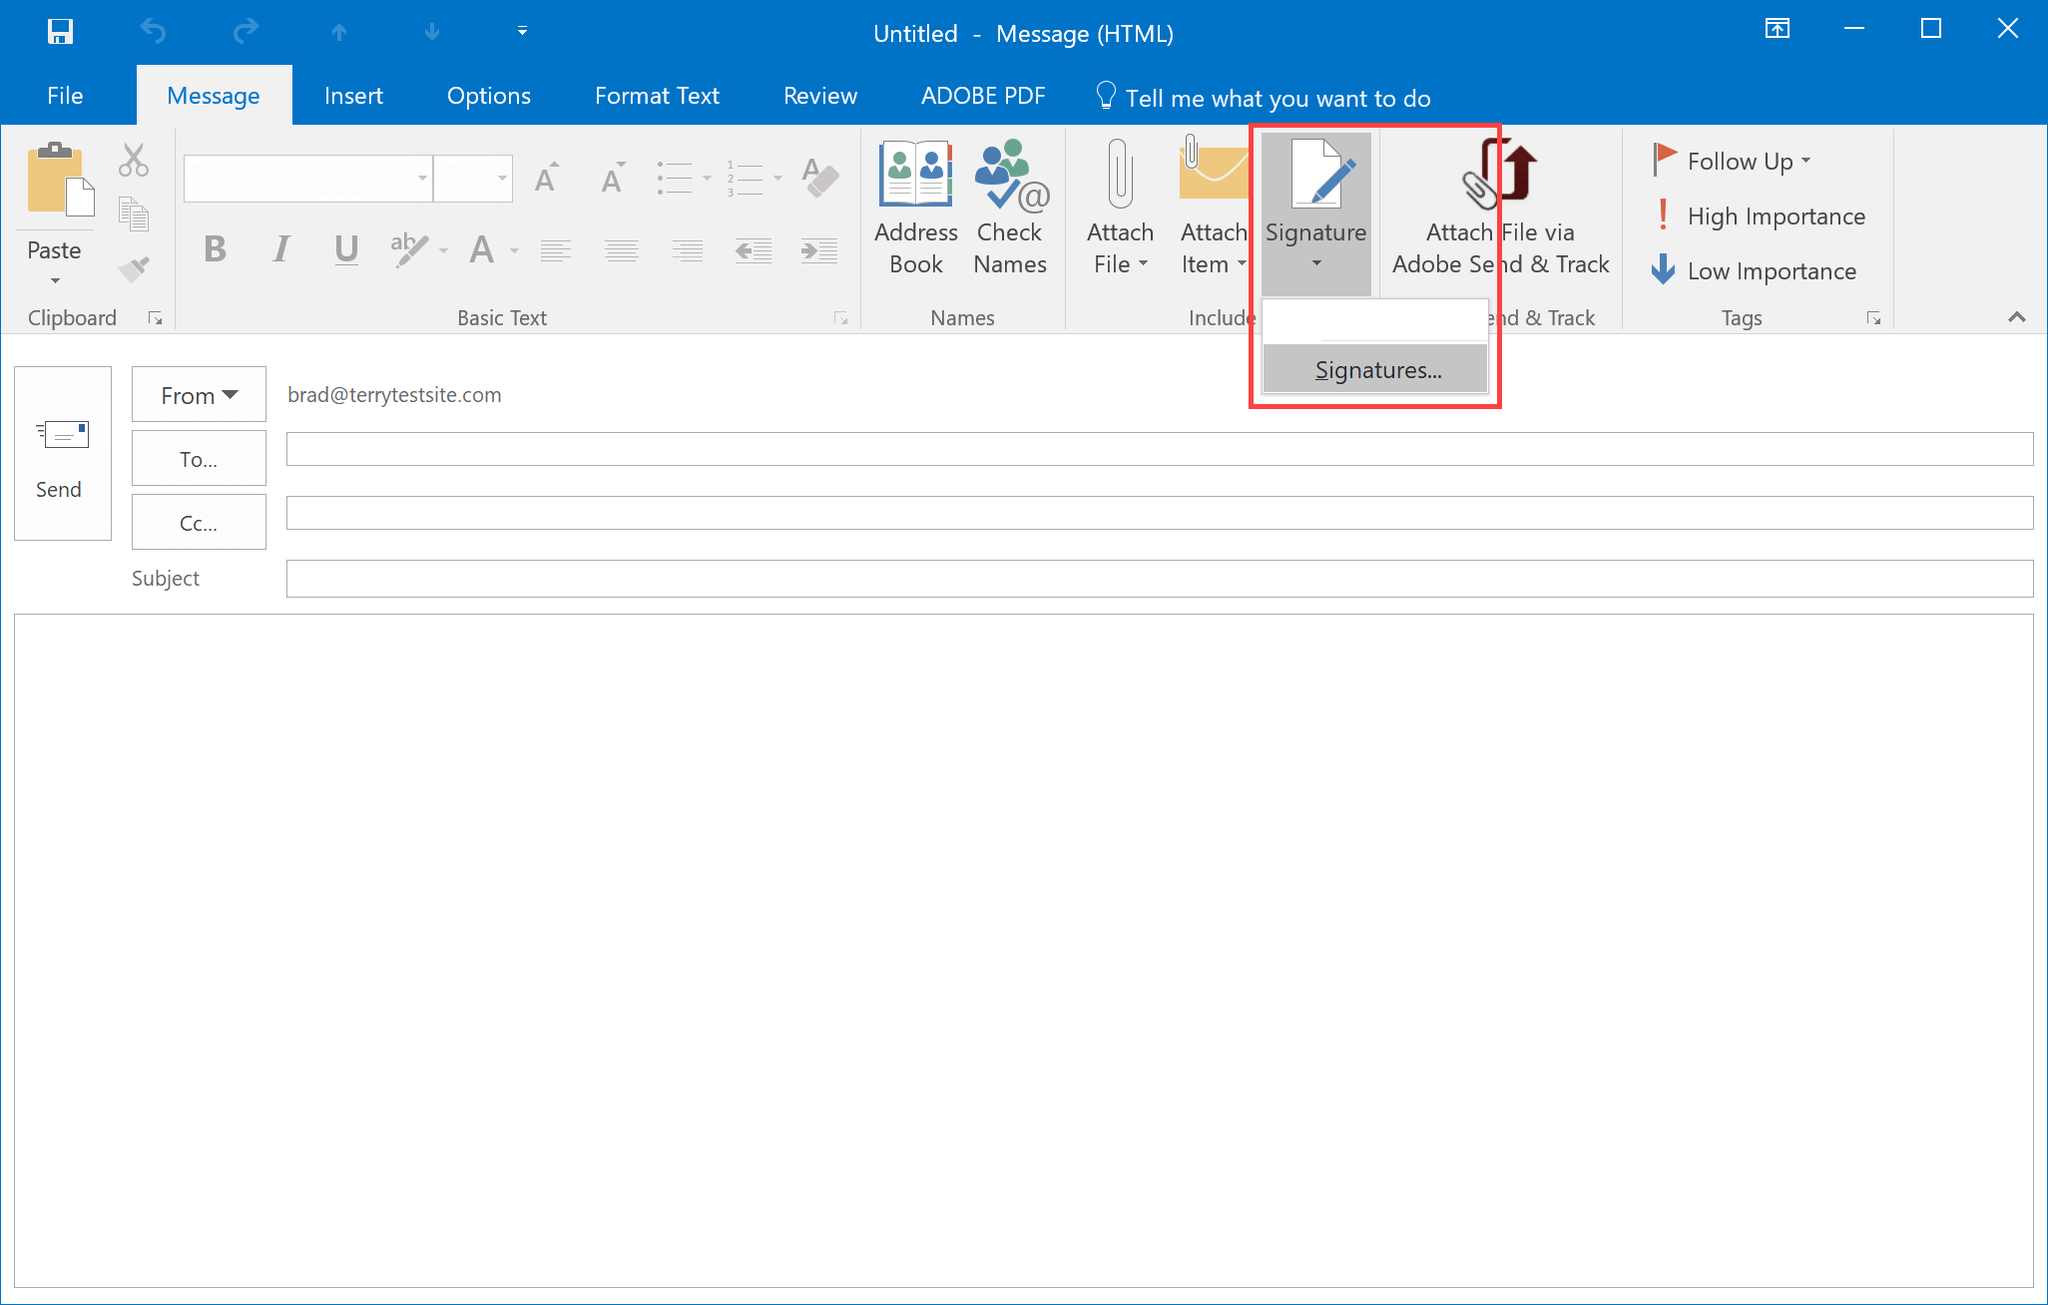 How To Add Signature In Outlook 2016?